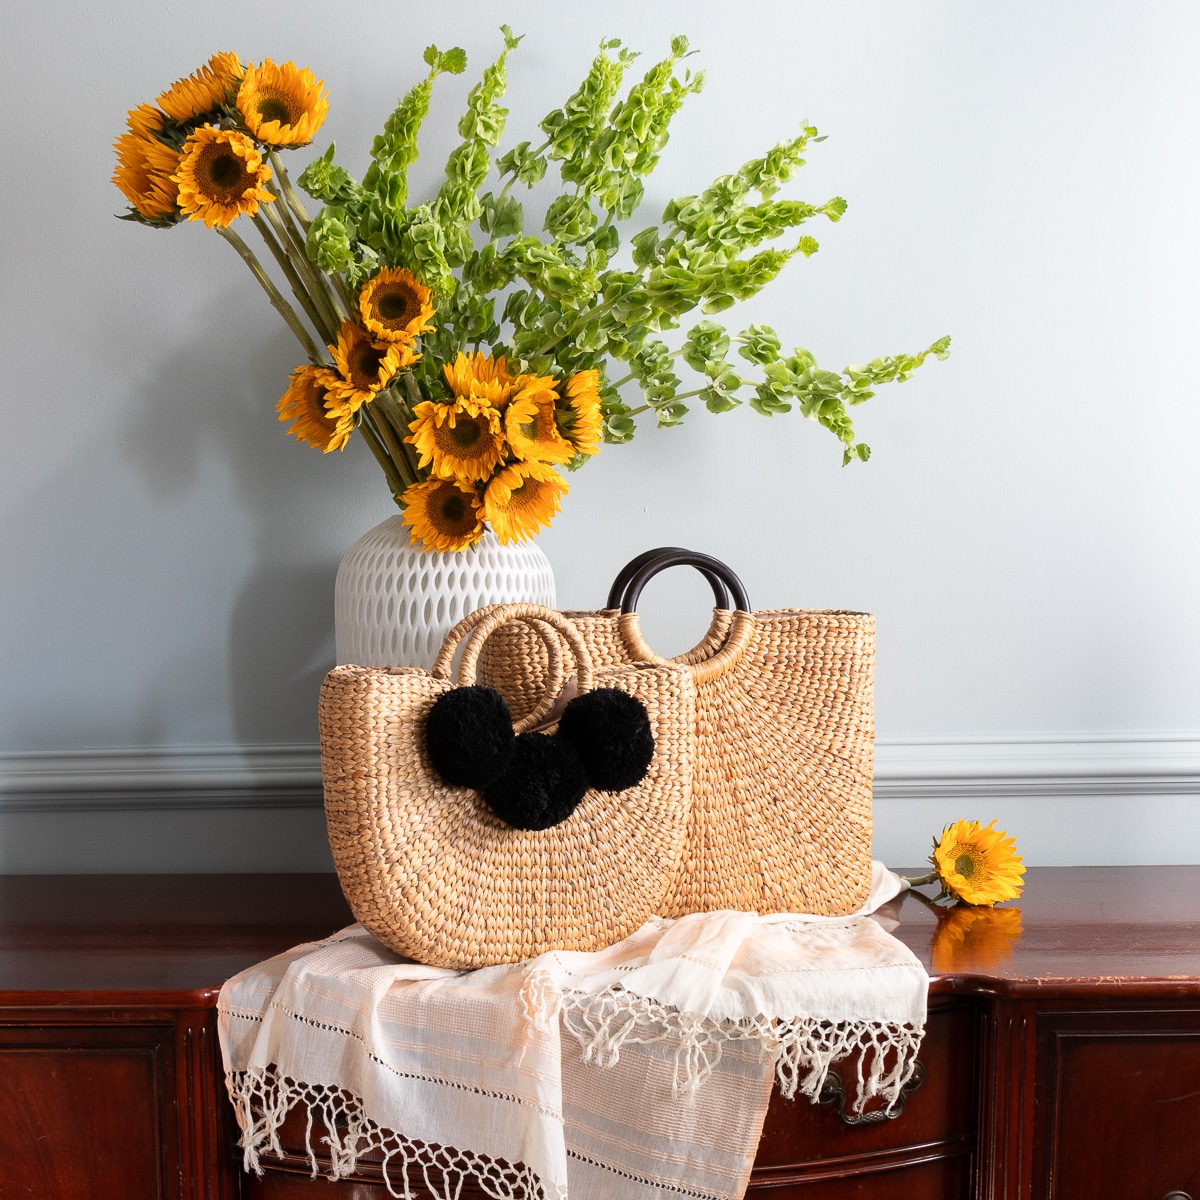 Hand Bags Image of two handbags each i our collection. The bags are straw grass. One features stained wooded handels in a ring design. The other straw handles with black poly cotton pom-poms on the front. very fun and summer stylish